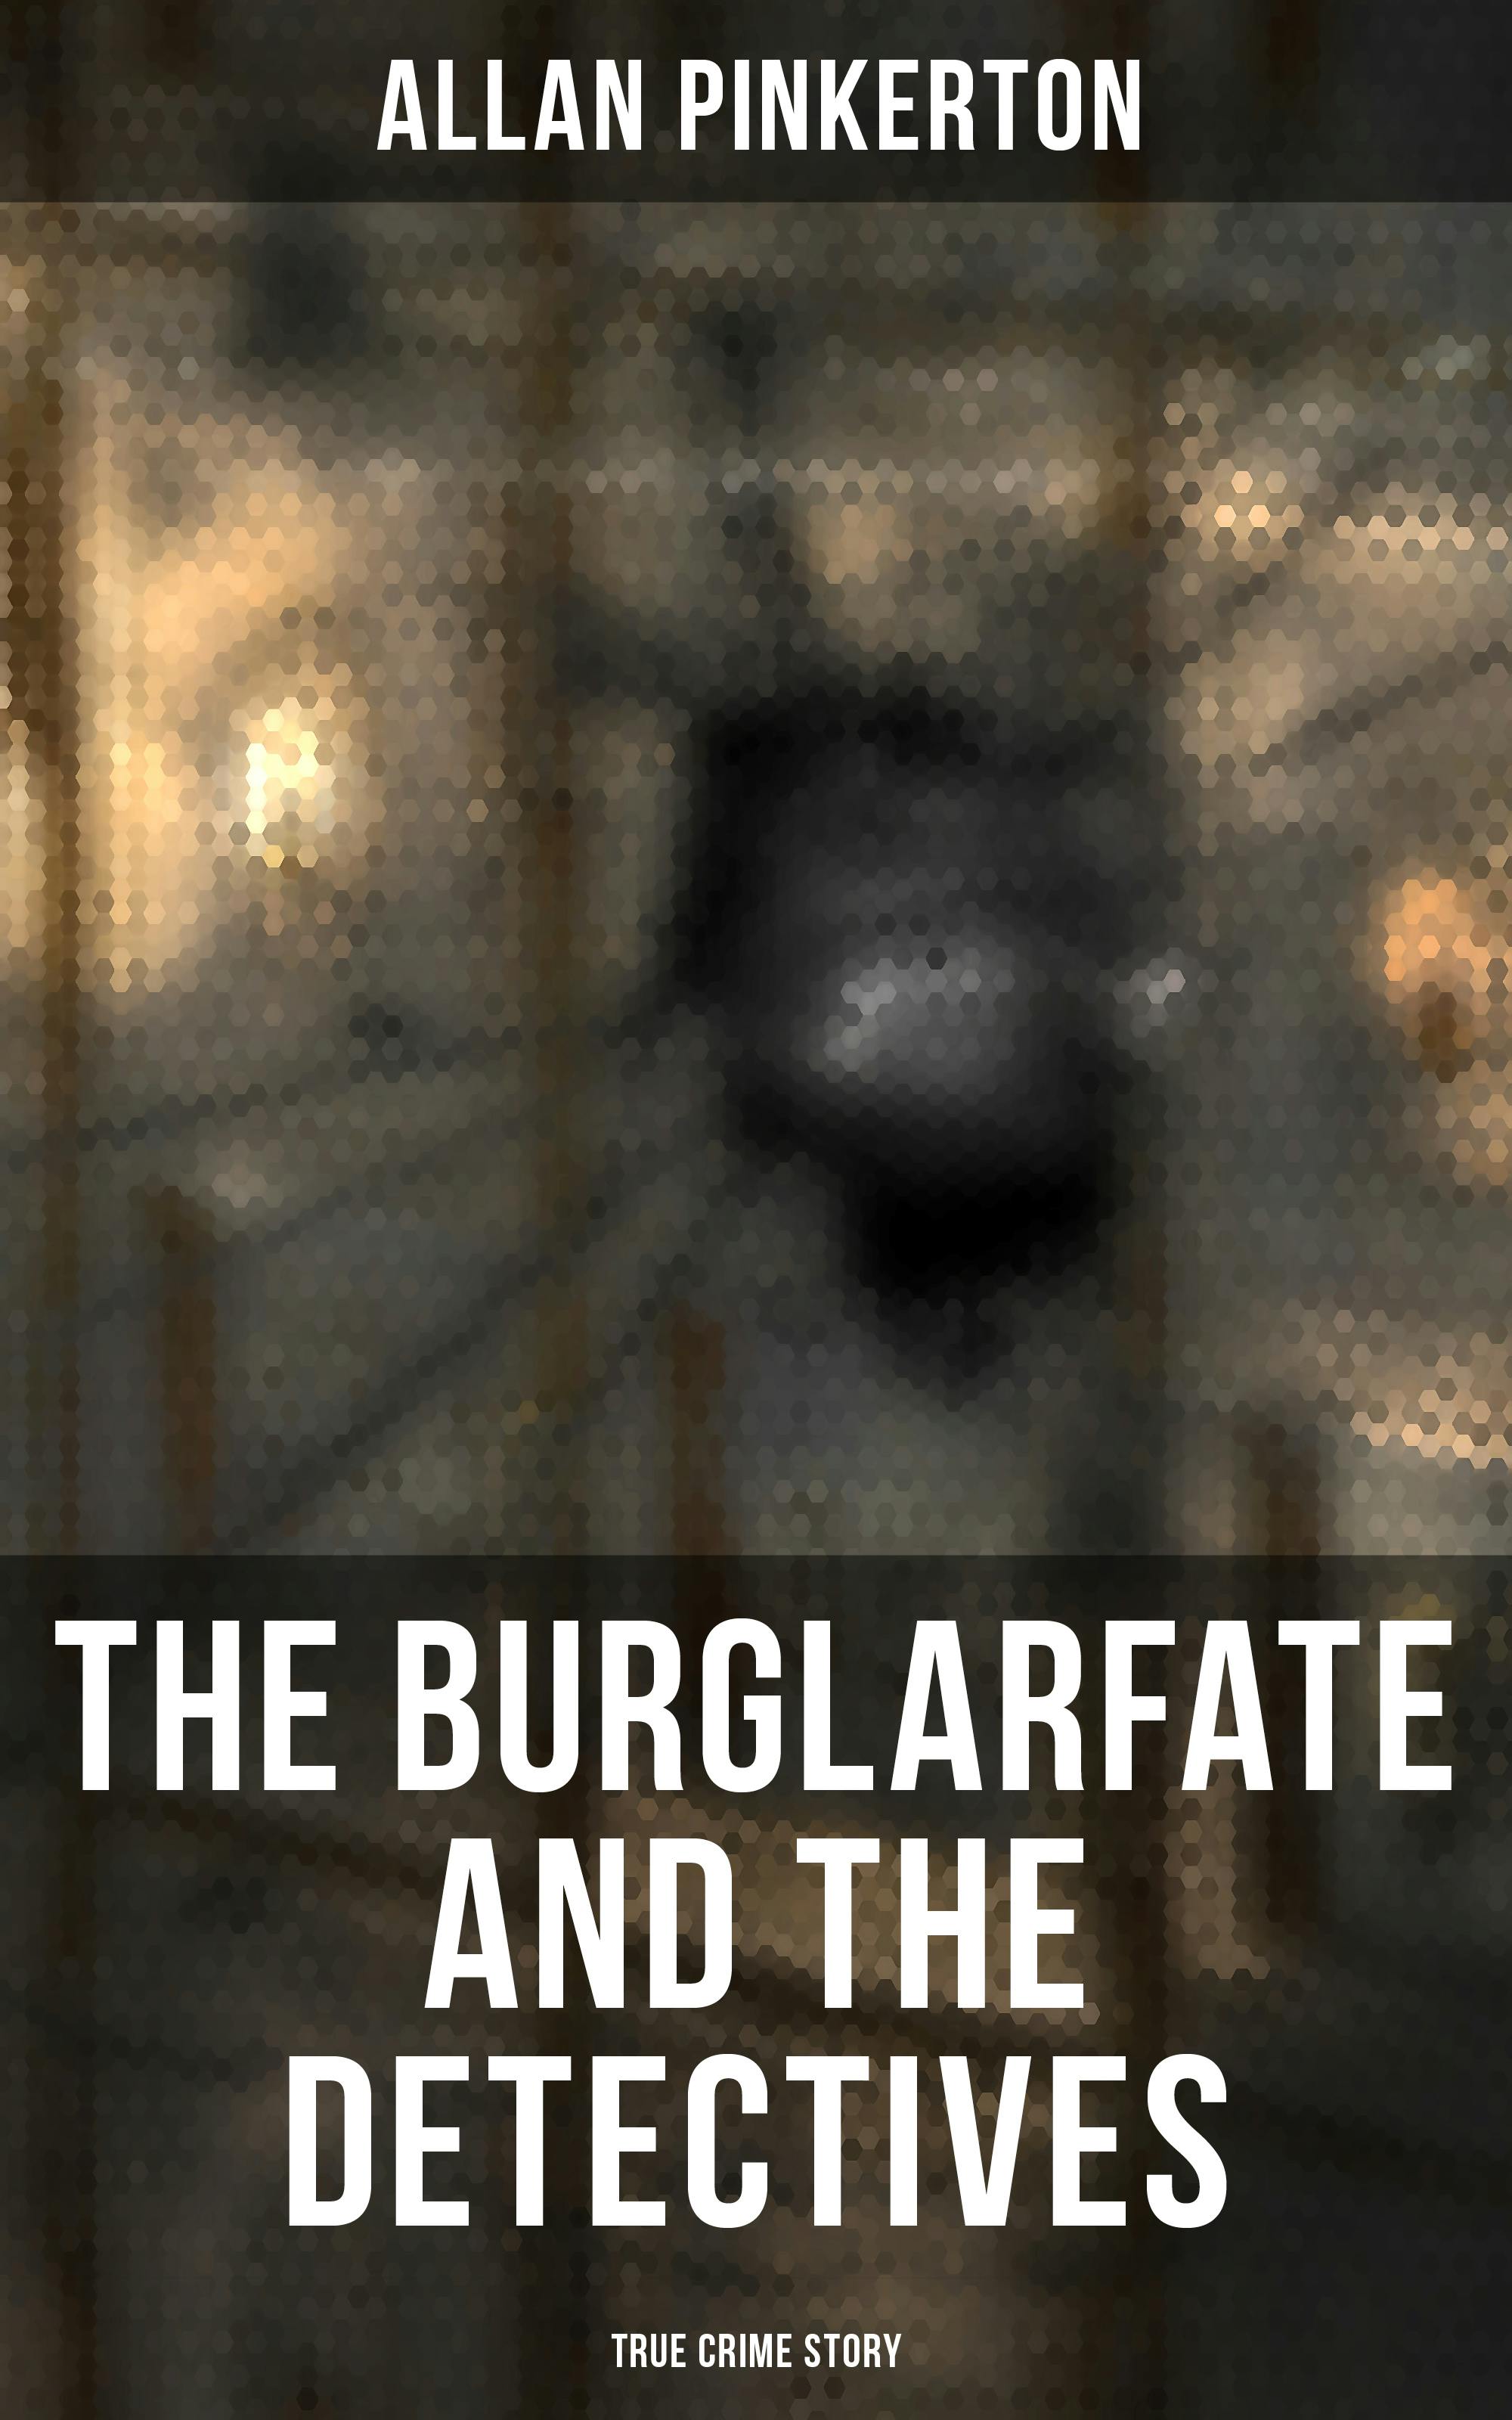 The Burglar's Fate and the Detectives (True Crime Story) - Allan Pinkerton